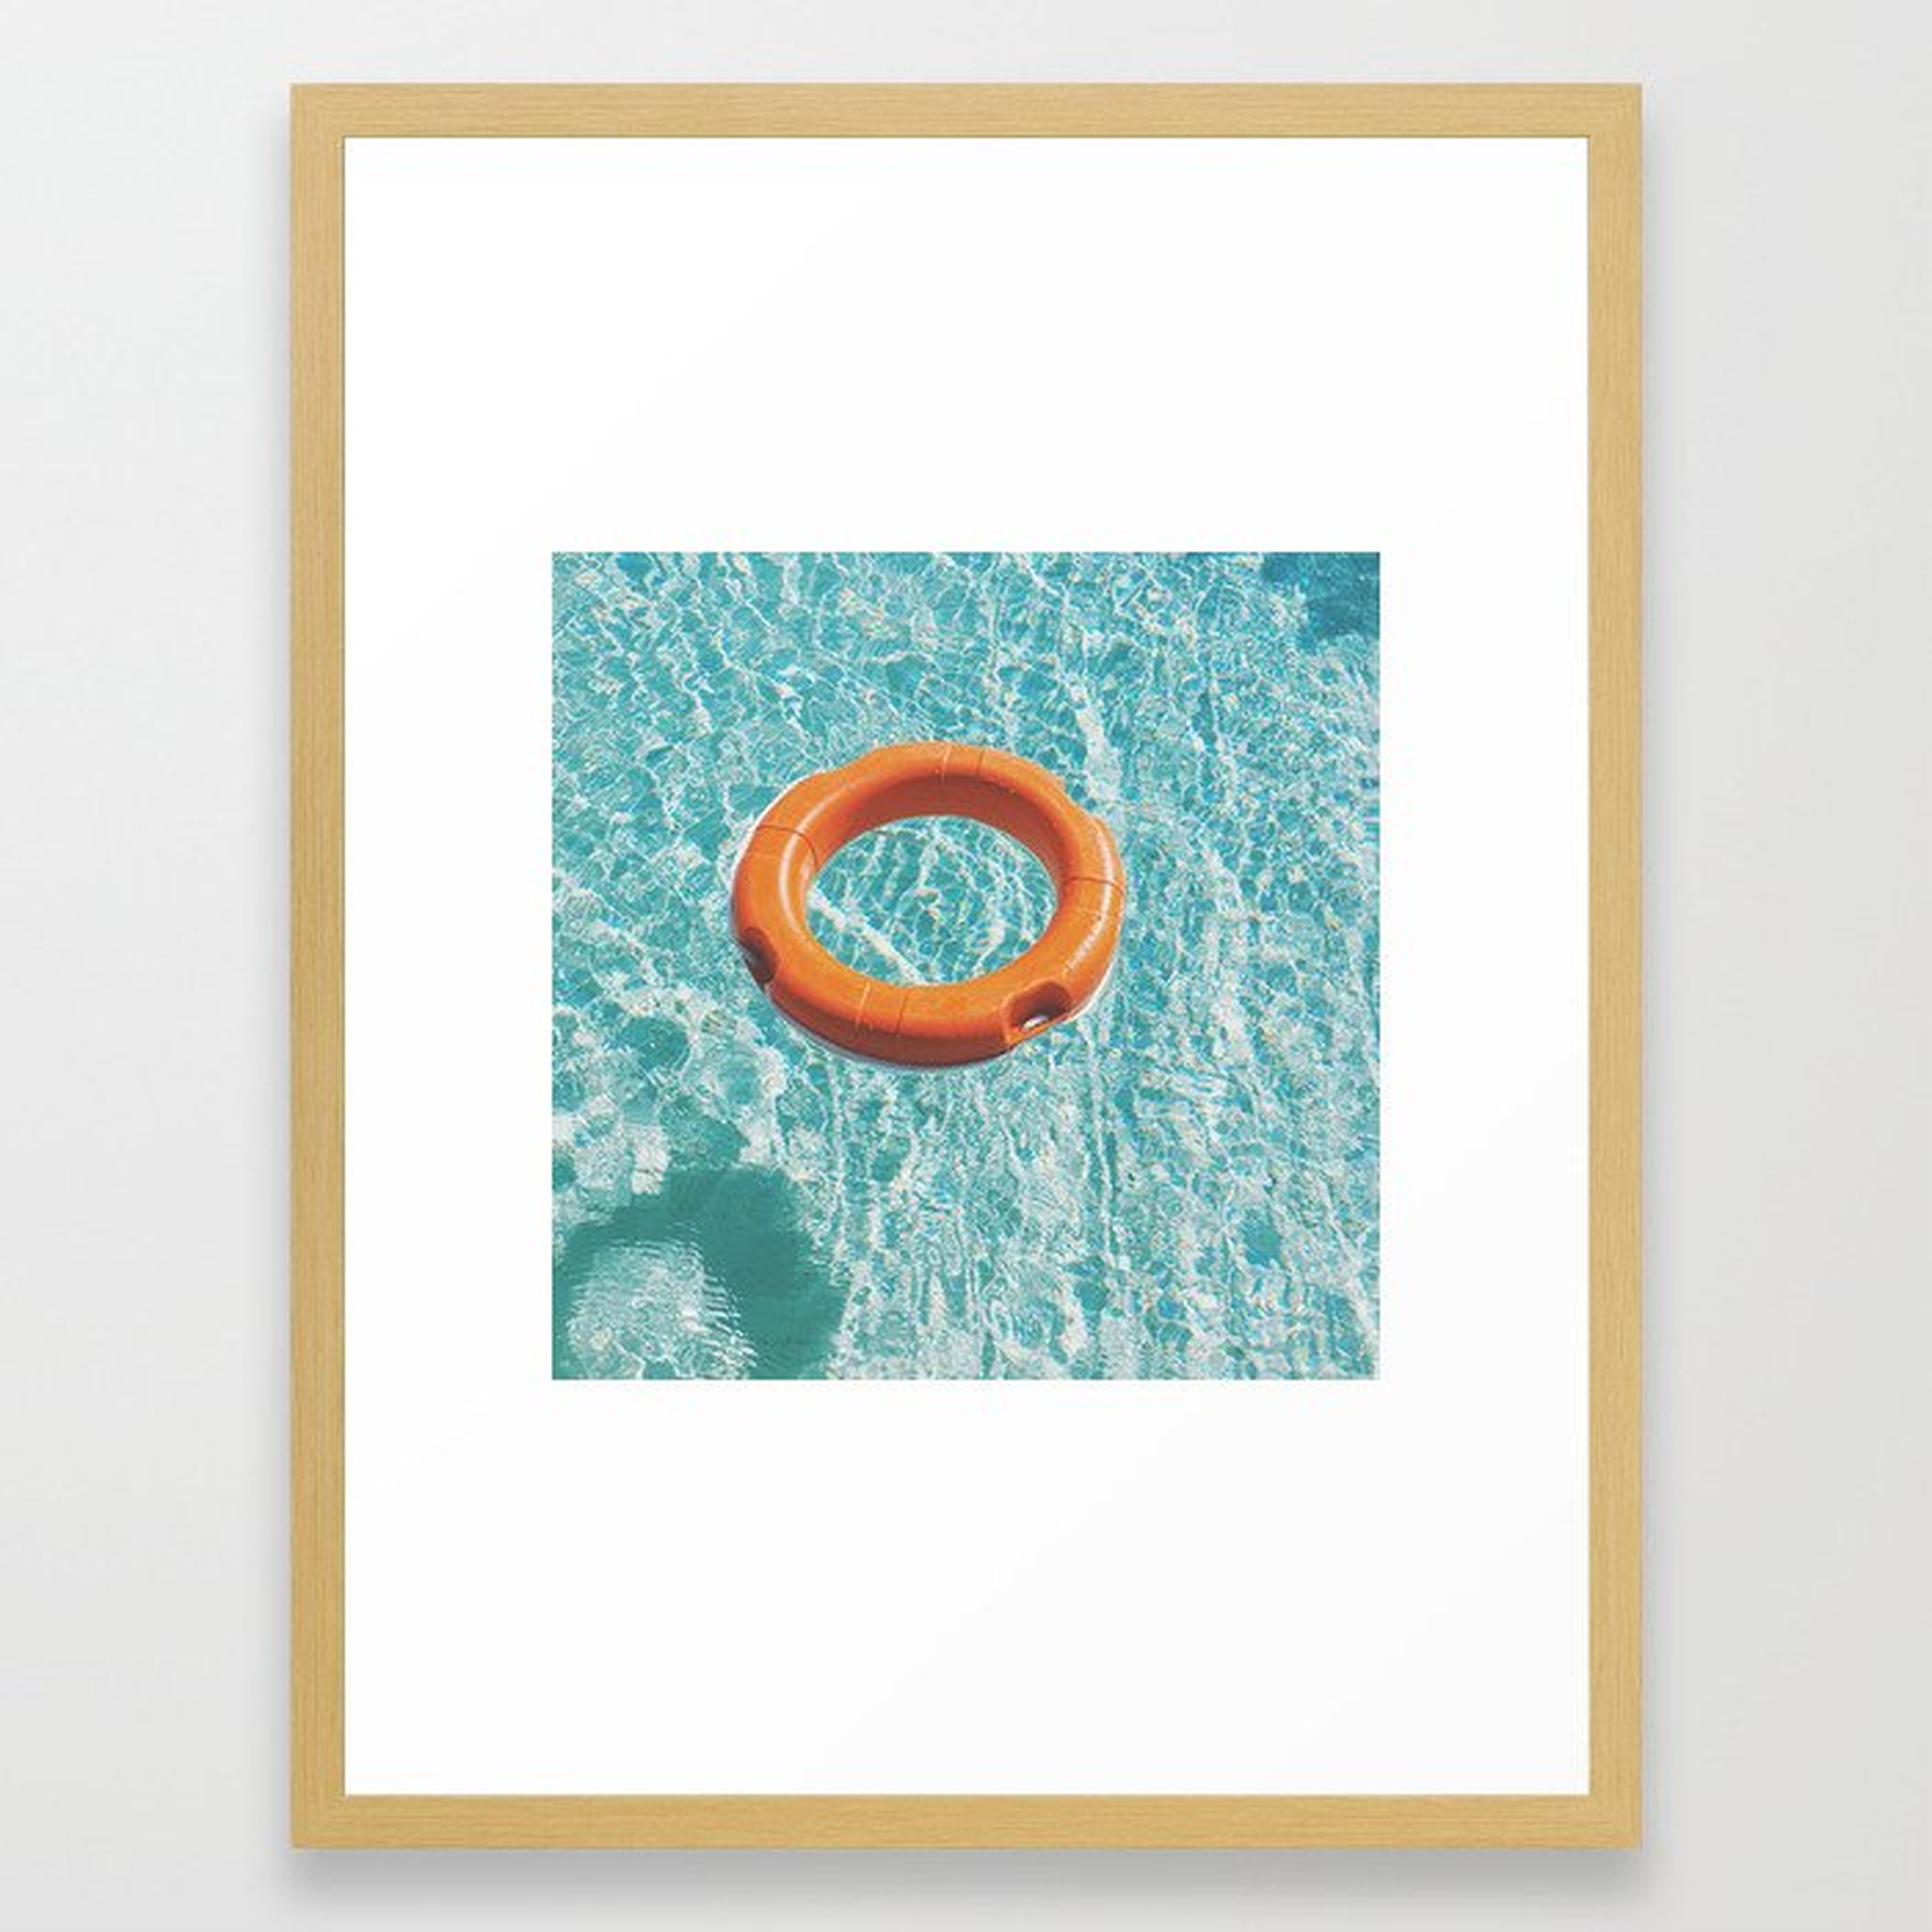 Swimming Pool Iii Framed Art Print by Cassia Beck - Conservation Natural - Society6